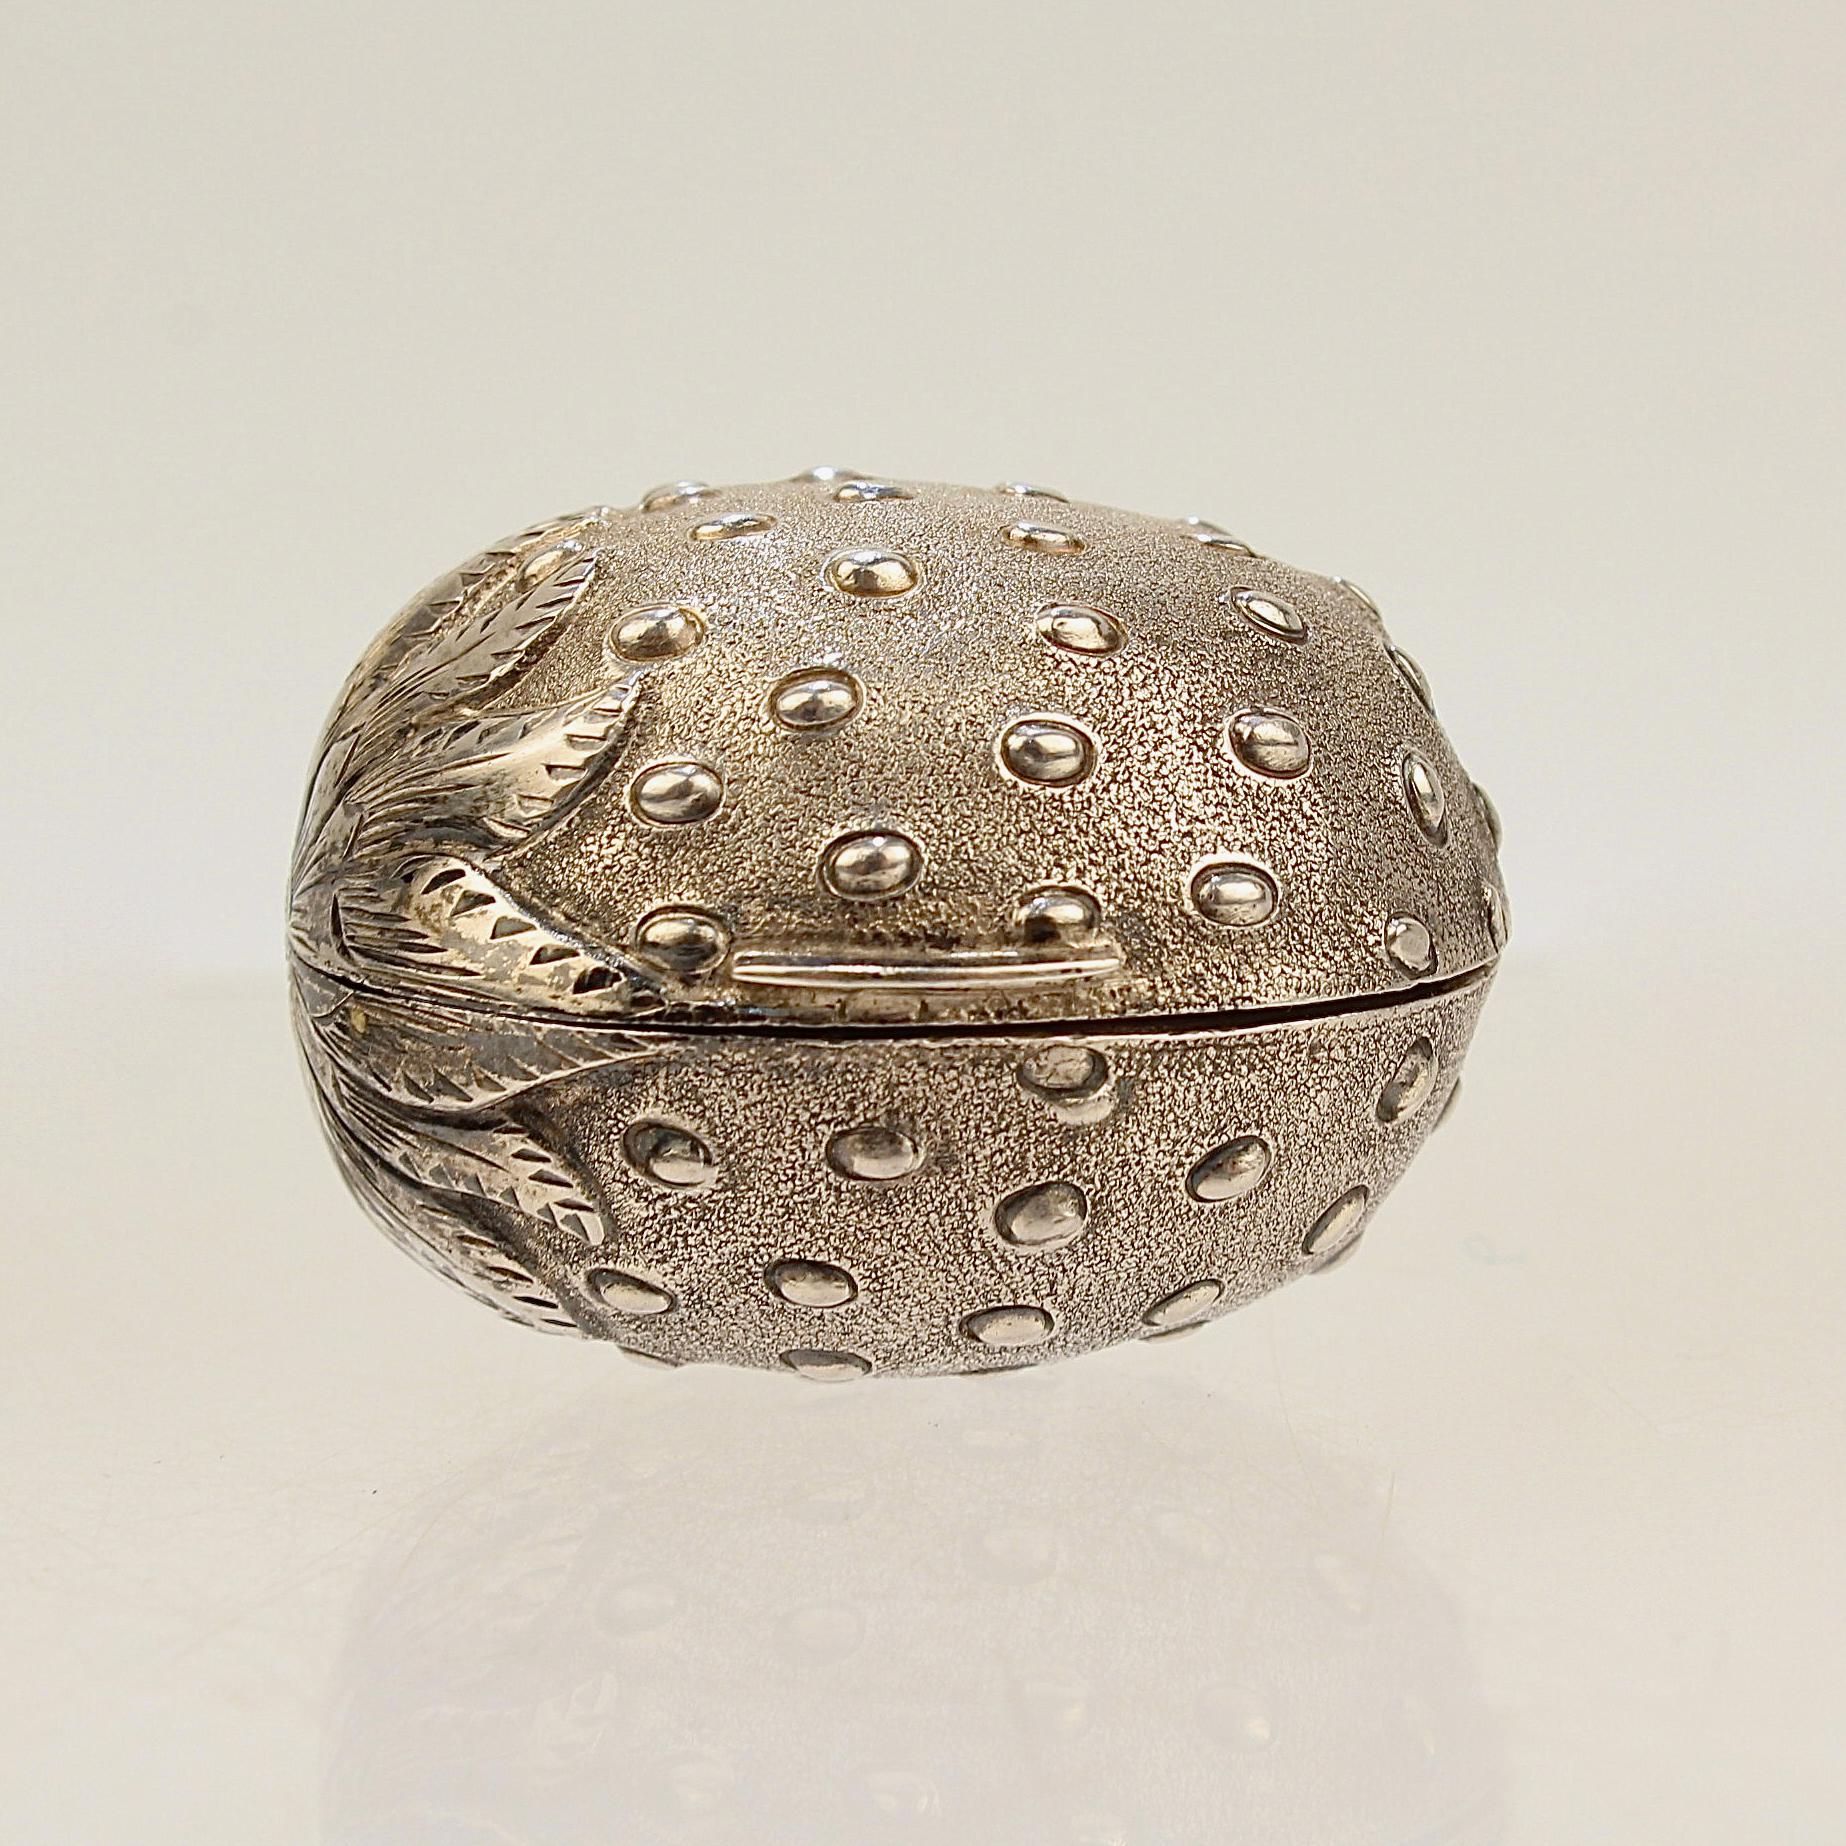 An extraordinarily rare English sterling silver nutmeg grater.

In the form of a strawberry by Hilliard and Thomason of Birmingham, England.

Modeled as a strawberry formed body, it has a semi-matte finished surface with raised 'seeds' and 'leaves'.